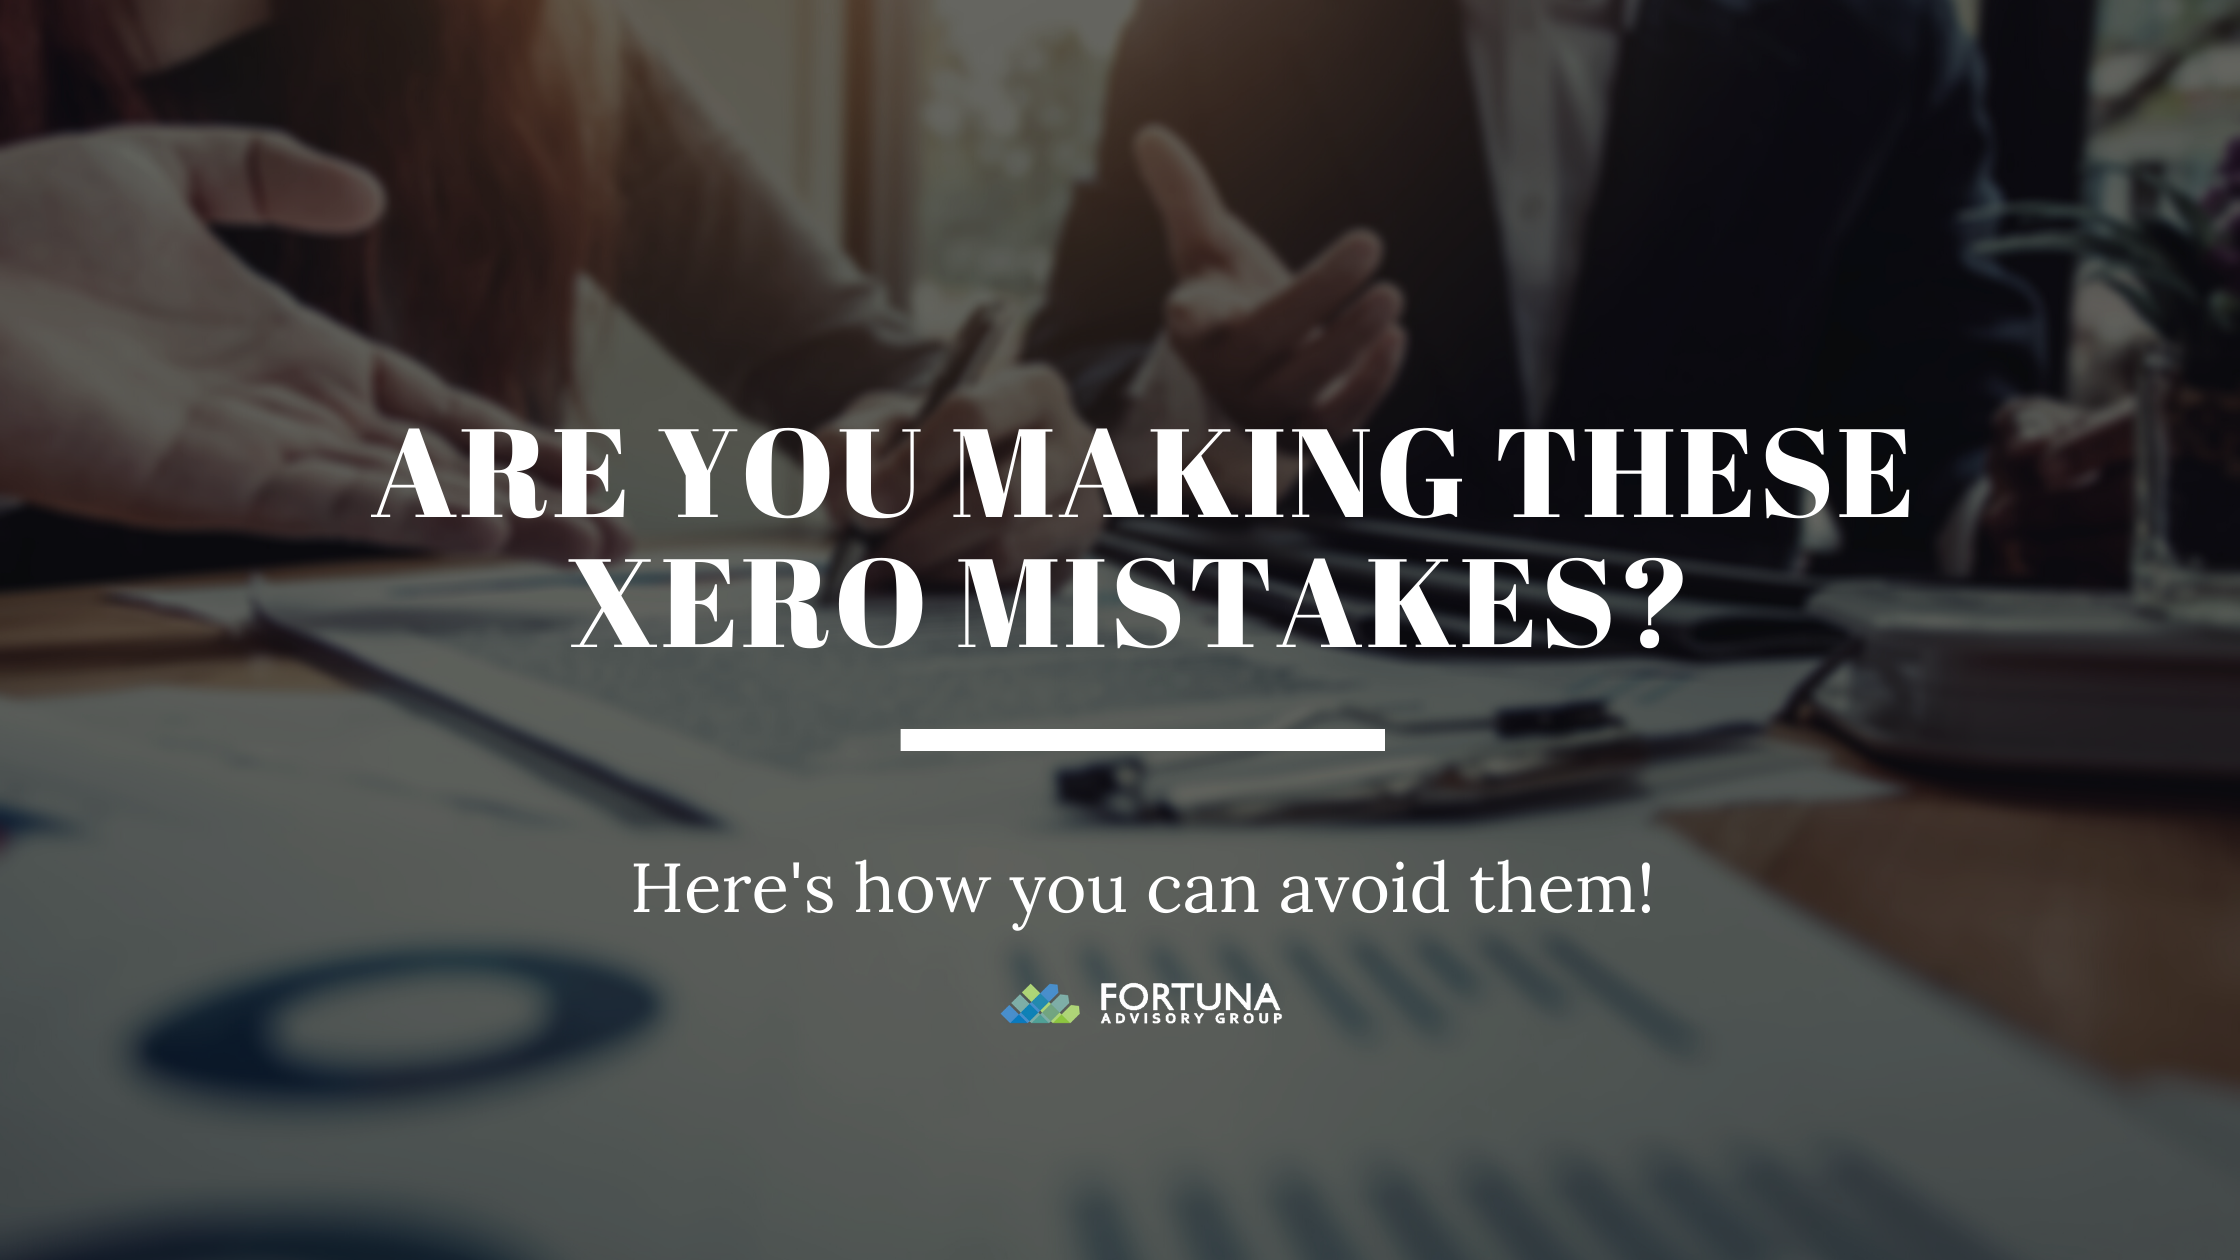 Xero mistakes made by business owners